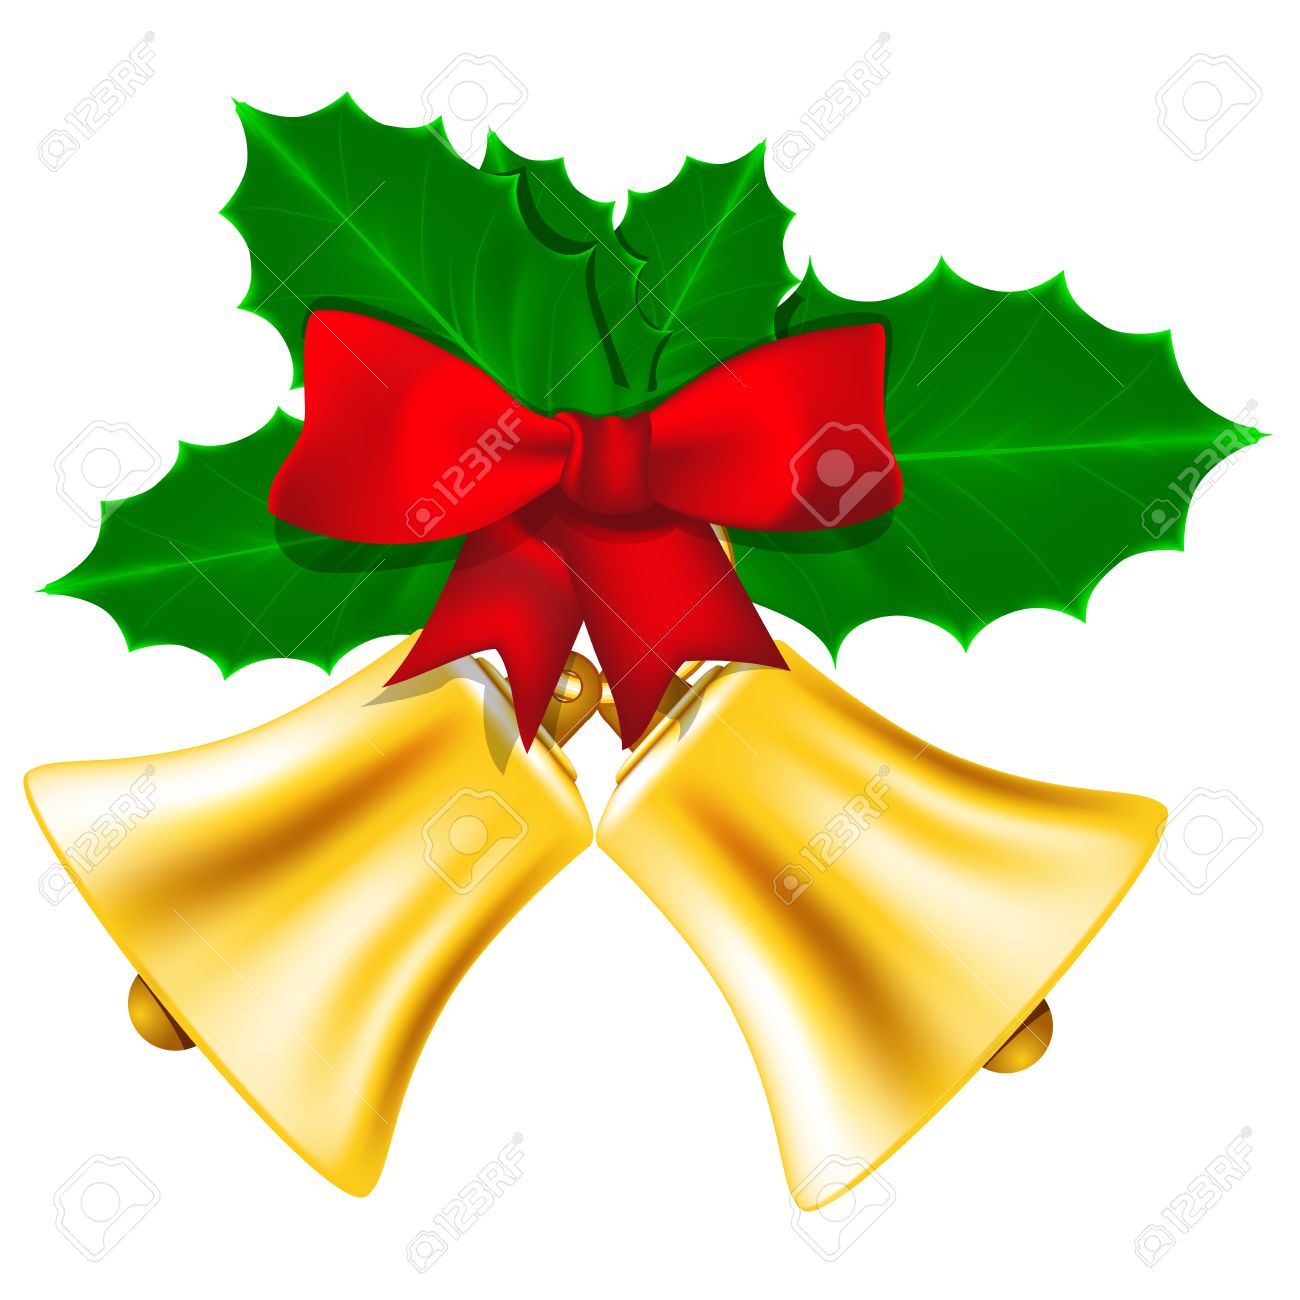 holly leaves: Golden Christmas bells with red bow and leaves of holly